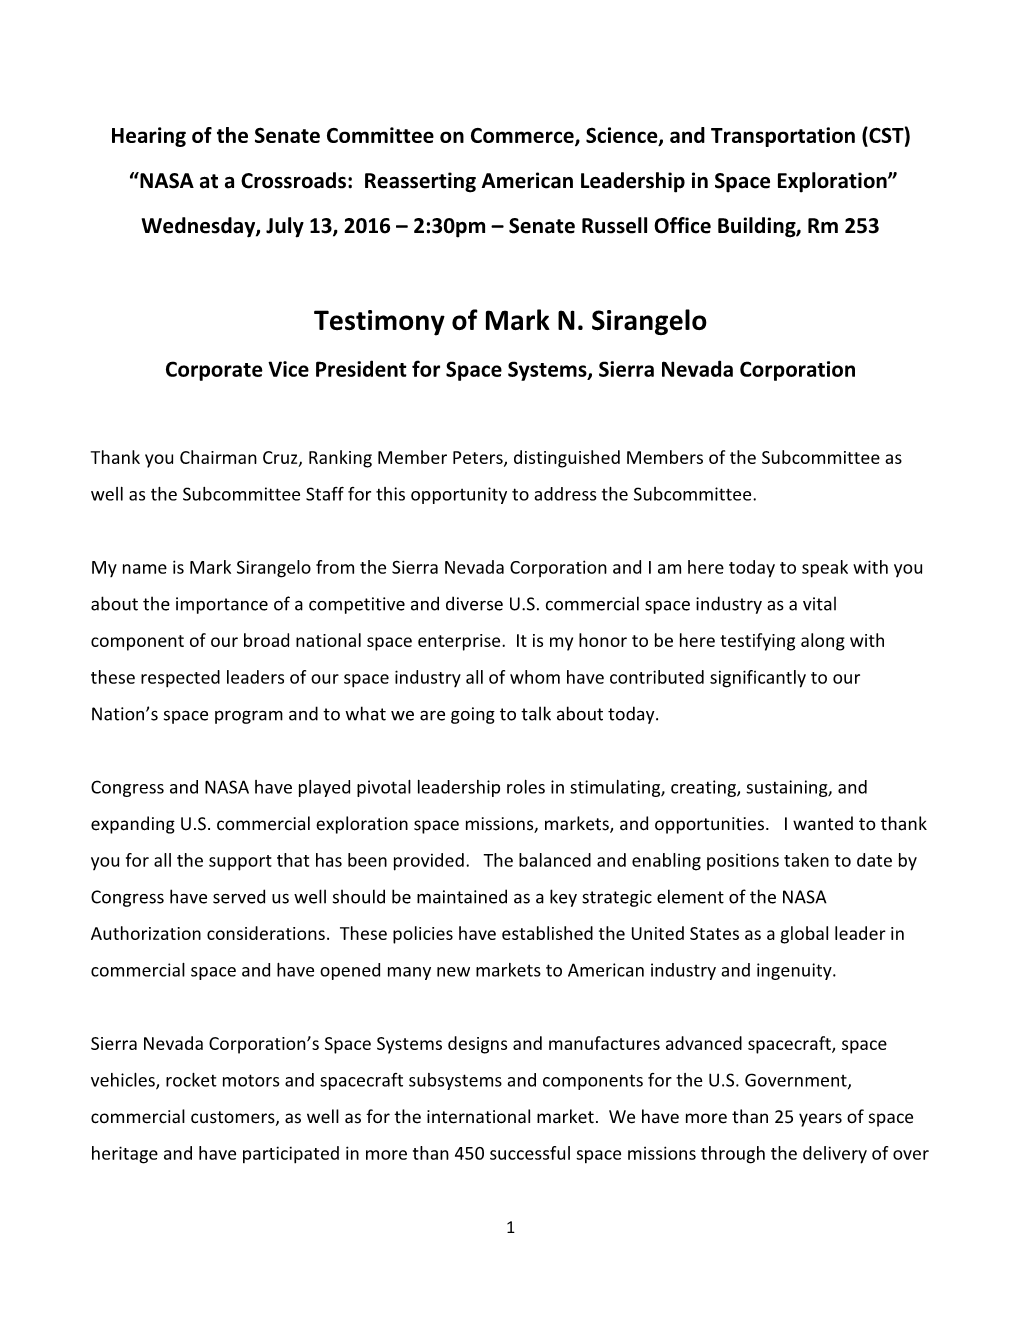 Testimony of Mark N. Sirangelo Corporate Vice President for Space Systems, Sierra Nevada Corporation